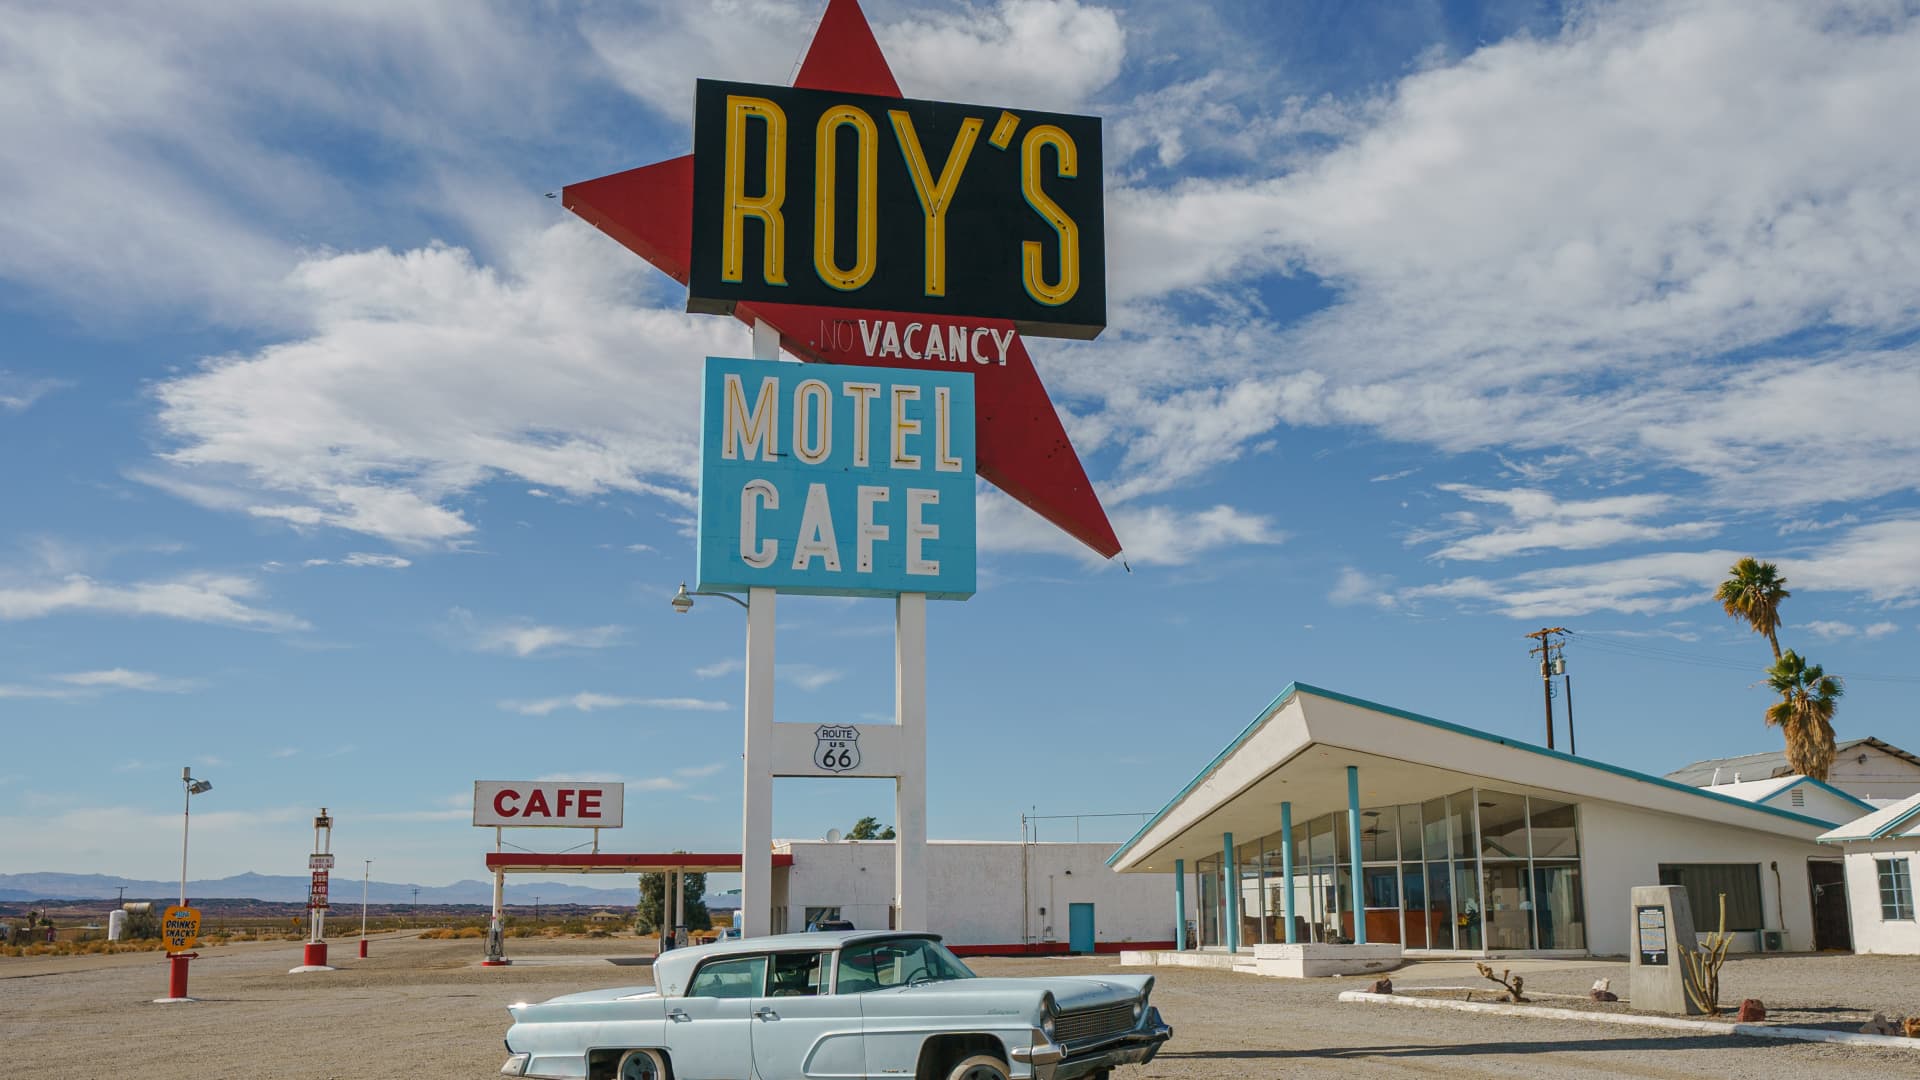 Roy's Motel & Cafe along historic Route 66 in Amboy, California.